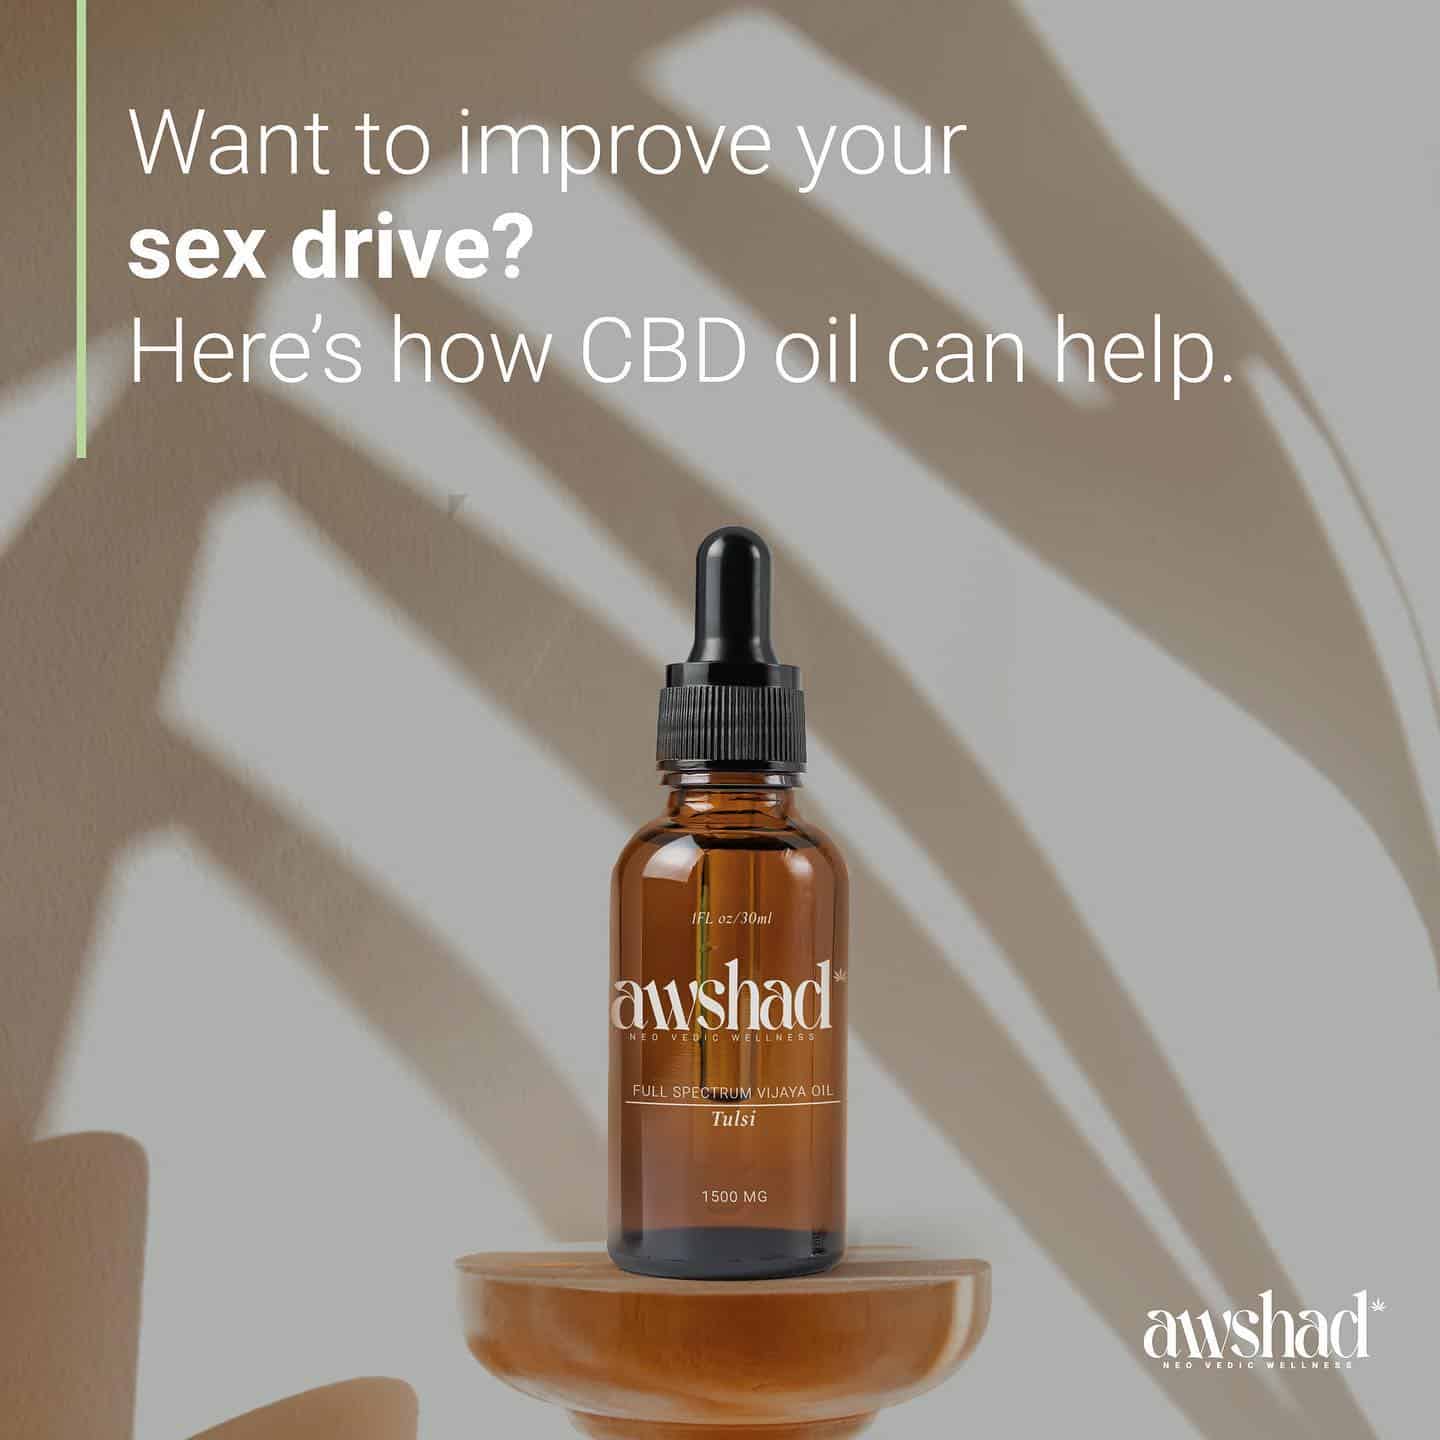 When it comes to sex, research in the past has proven that CBD oil reduces anxiety in both men and women. This helps improve libido which increases sexual pleasure and sets the right mood. 

Cannabis extracts also help in strengthening muscles that activate sexual desire. The entourage effect caused in the body by CBD oil helps regulate the functioning of the body by increasing blood circulation that boosts sexual performance. 

CBD can also improve your sex life by providing a deeper emotional connection during intimacy. CBD increases the serum concentration of an endocannabinoid neurotransmitter called anandamide.

Usually, people take it 30-60 minutes before the entire process, but you can always consult an expert on how to go about the dosage. Shop our CBD oil now on www.awshad.com

#awshad #allnatural #hempbenefits #sex  #wellness #sexdrive #sexualwellness #vijayaoil  #hempextract #hempproducts #health #sexeducation  #healthandwellness #healthy #heal #natural #naturalremedy #ordernow #care #love  #safe #doctor #ayurveda #healing #newproduct